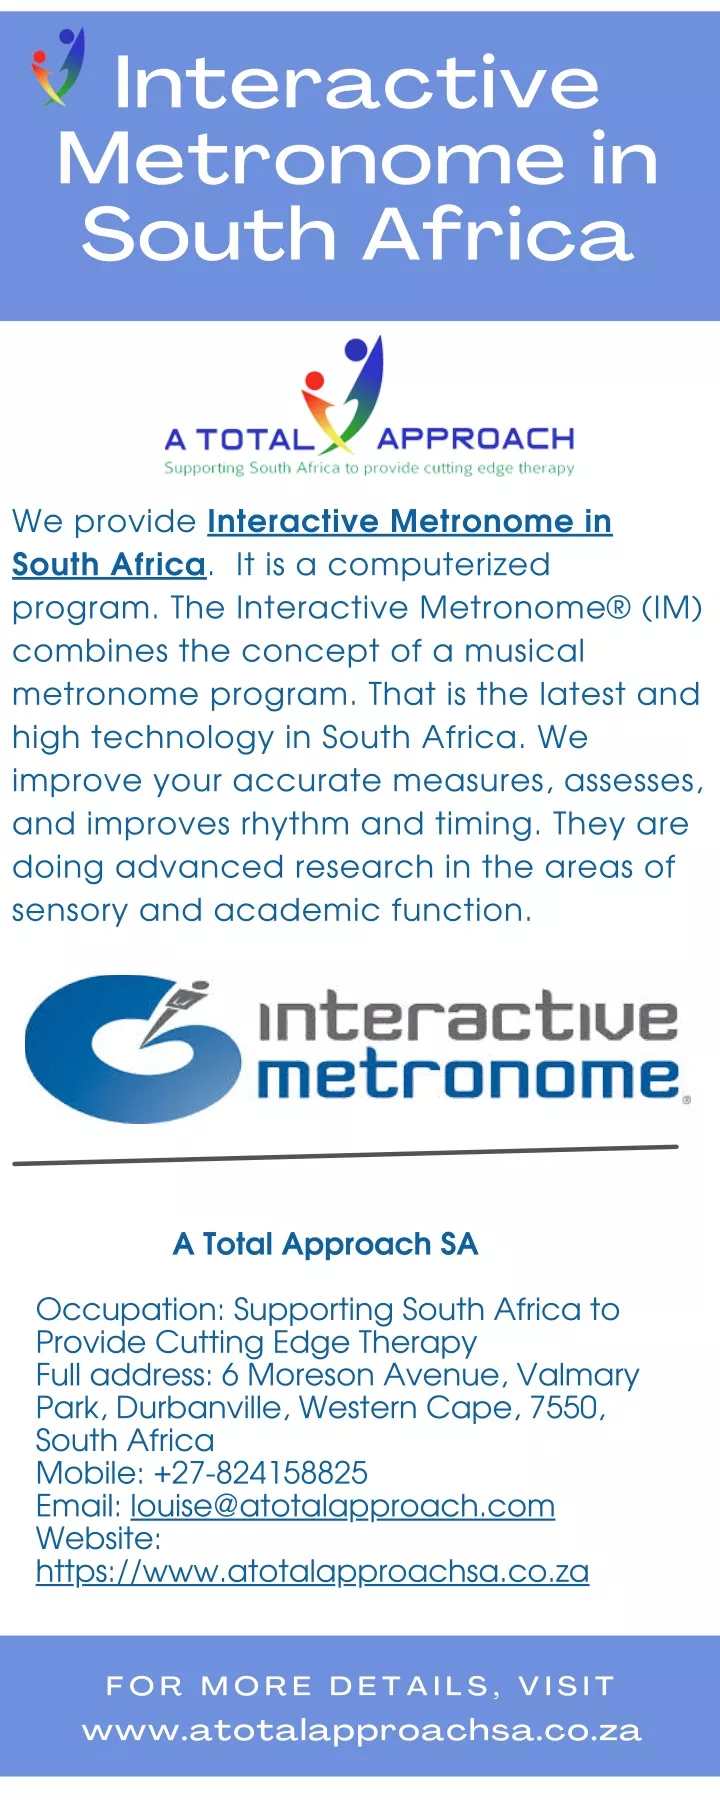 interactive metronome in south africa